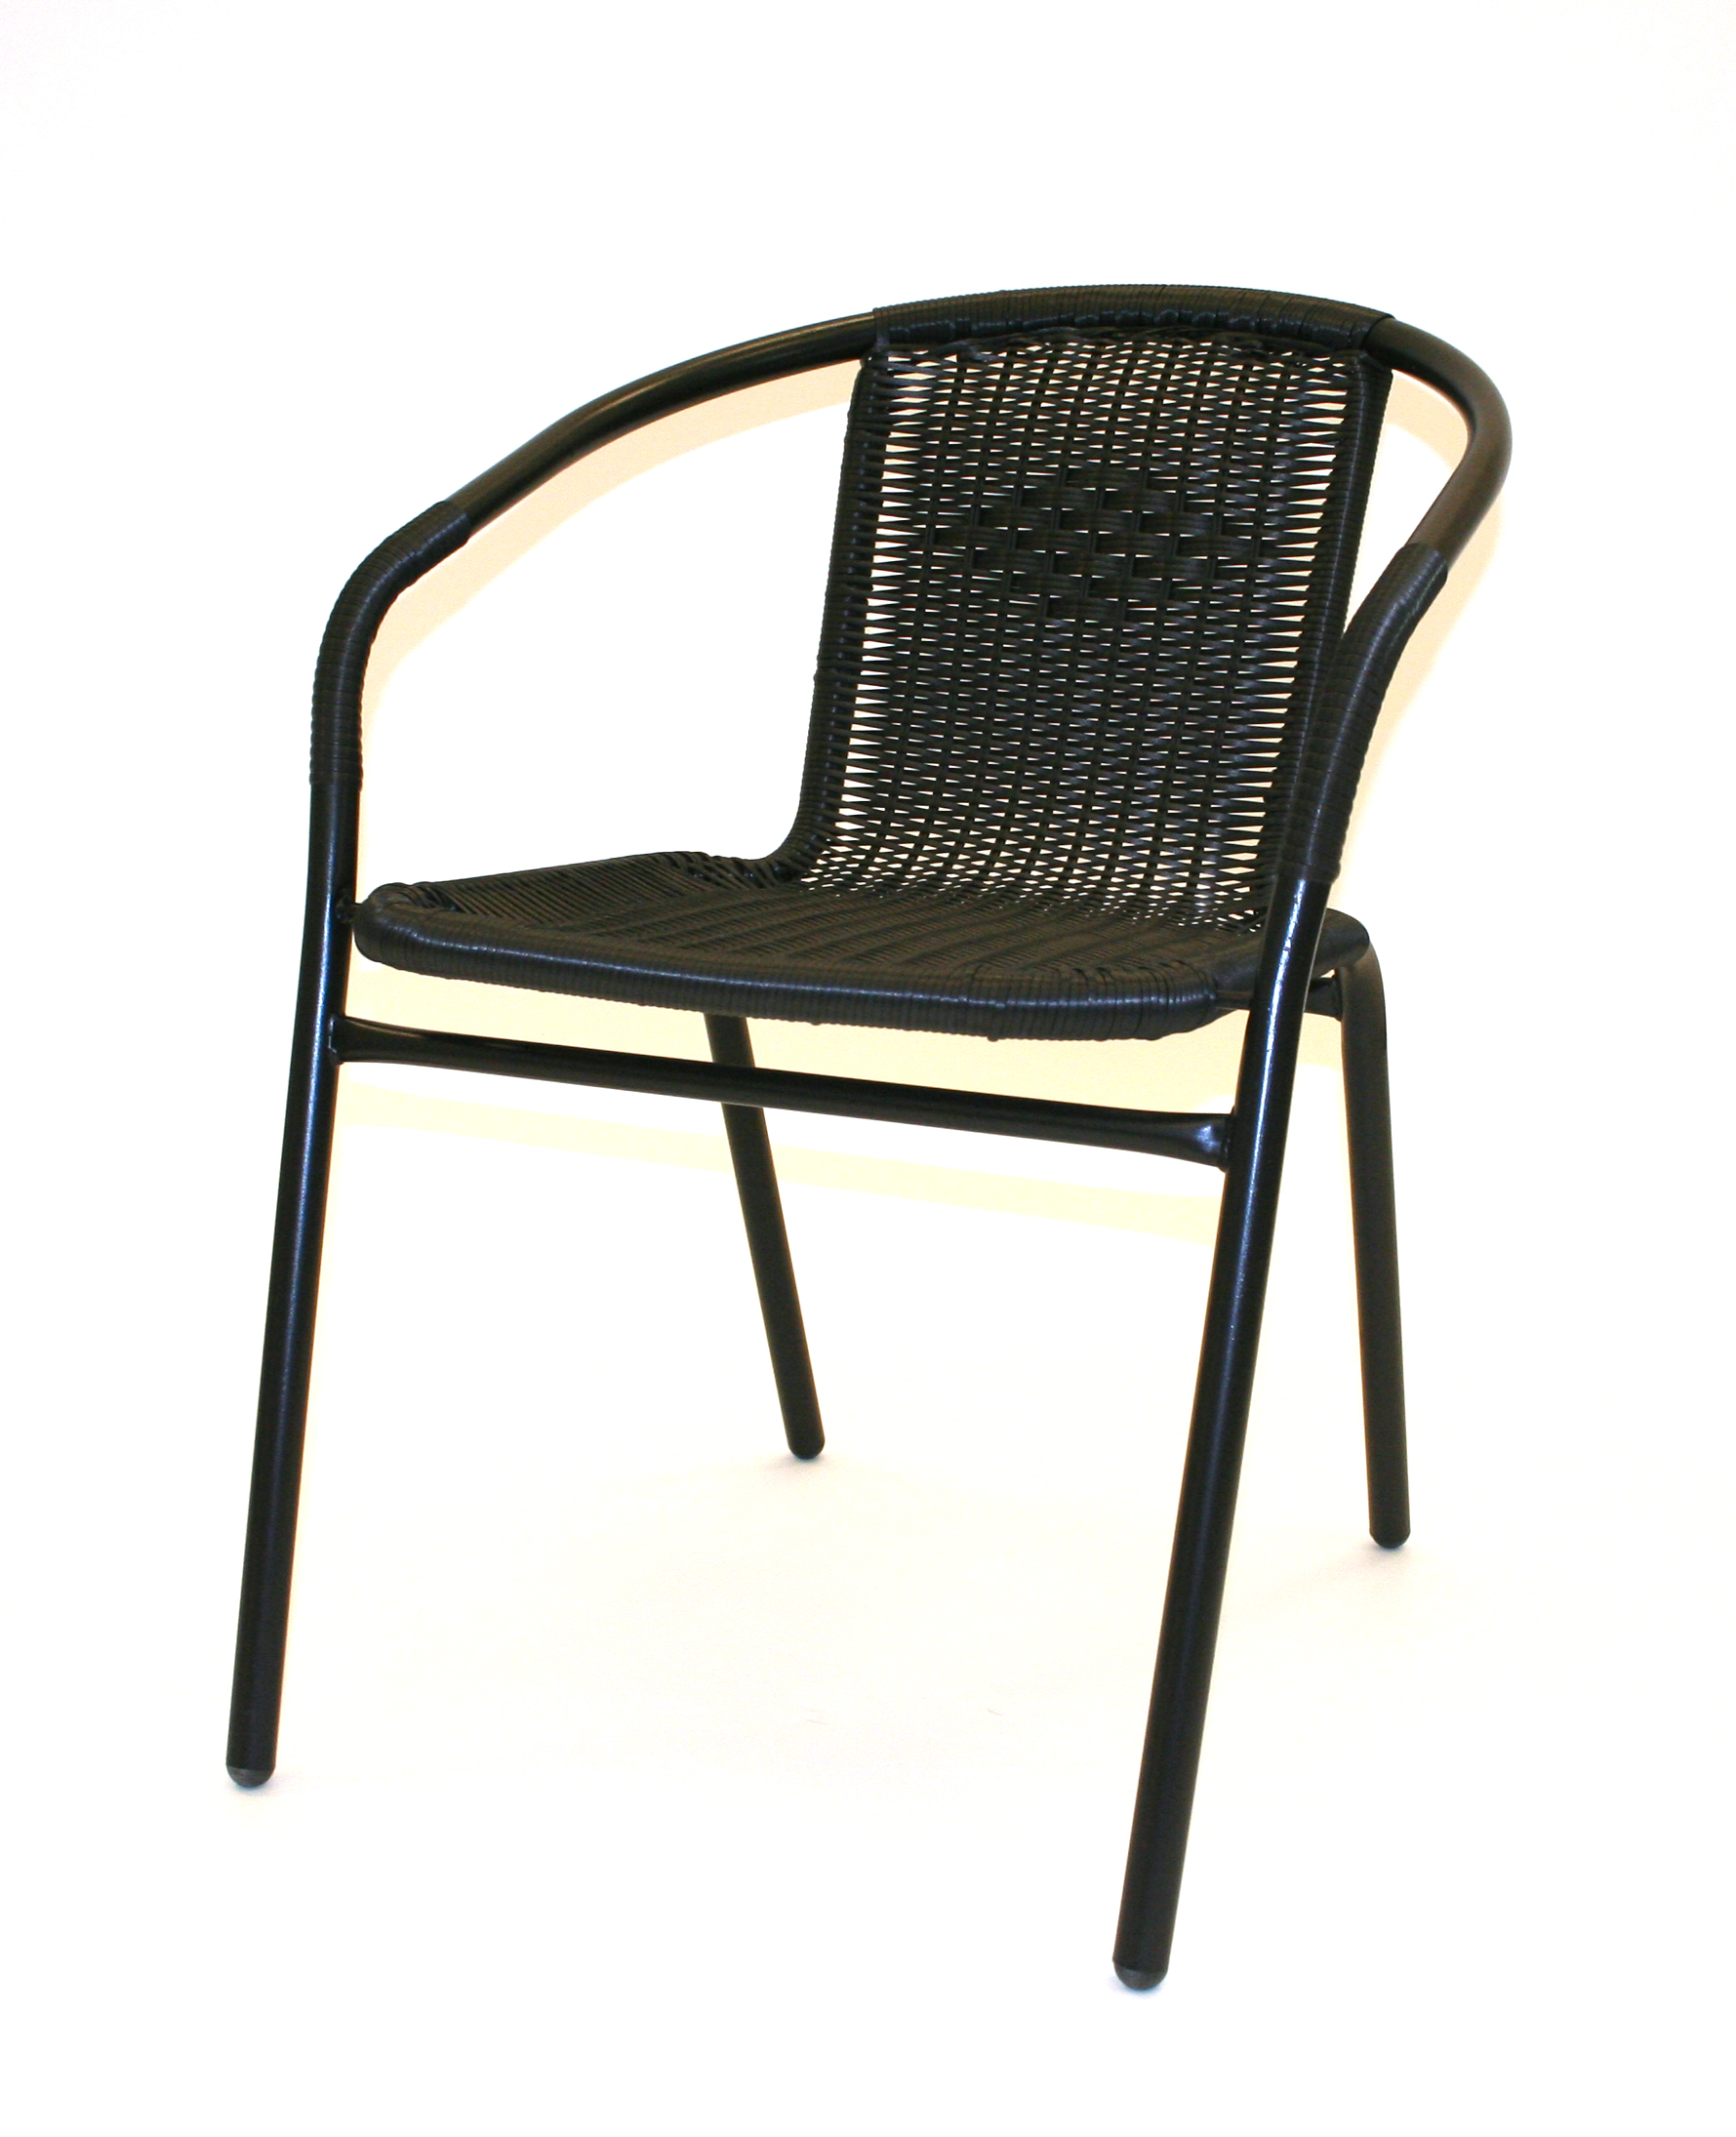 Black Rattan Chairs Cafe's, Bistros or Home BE